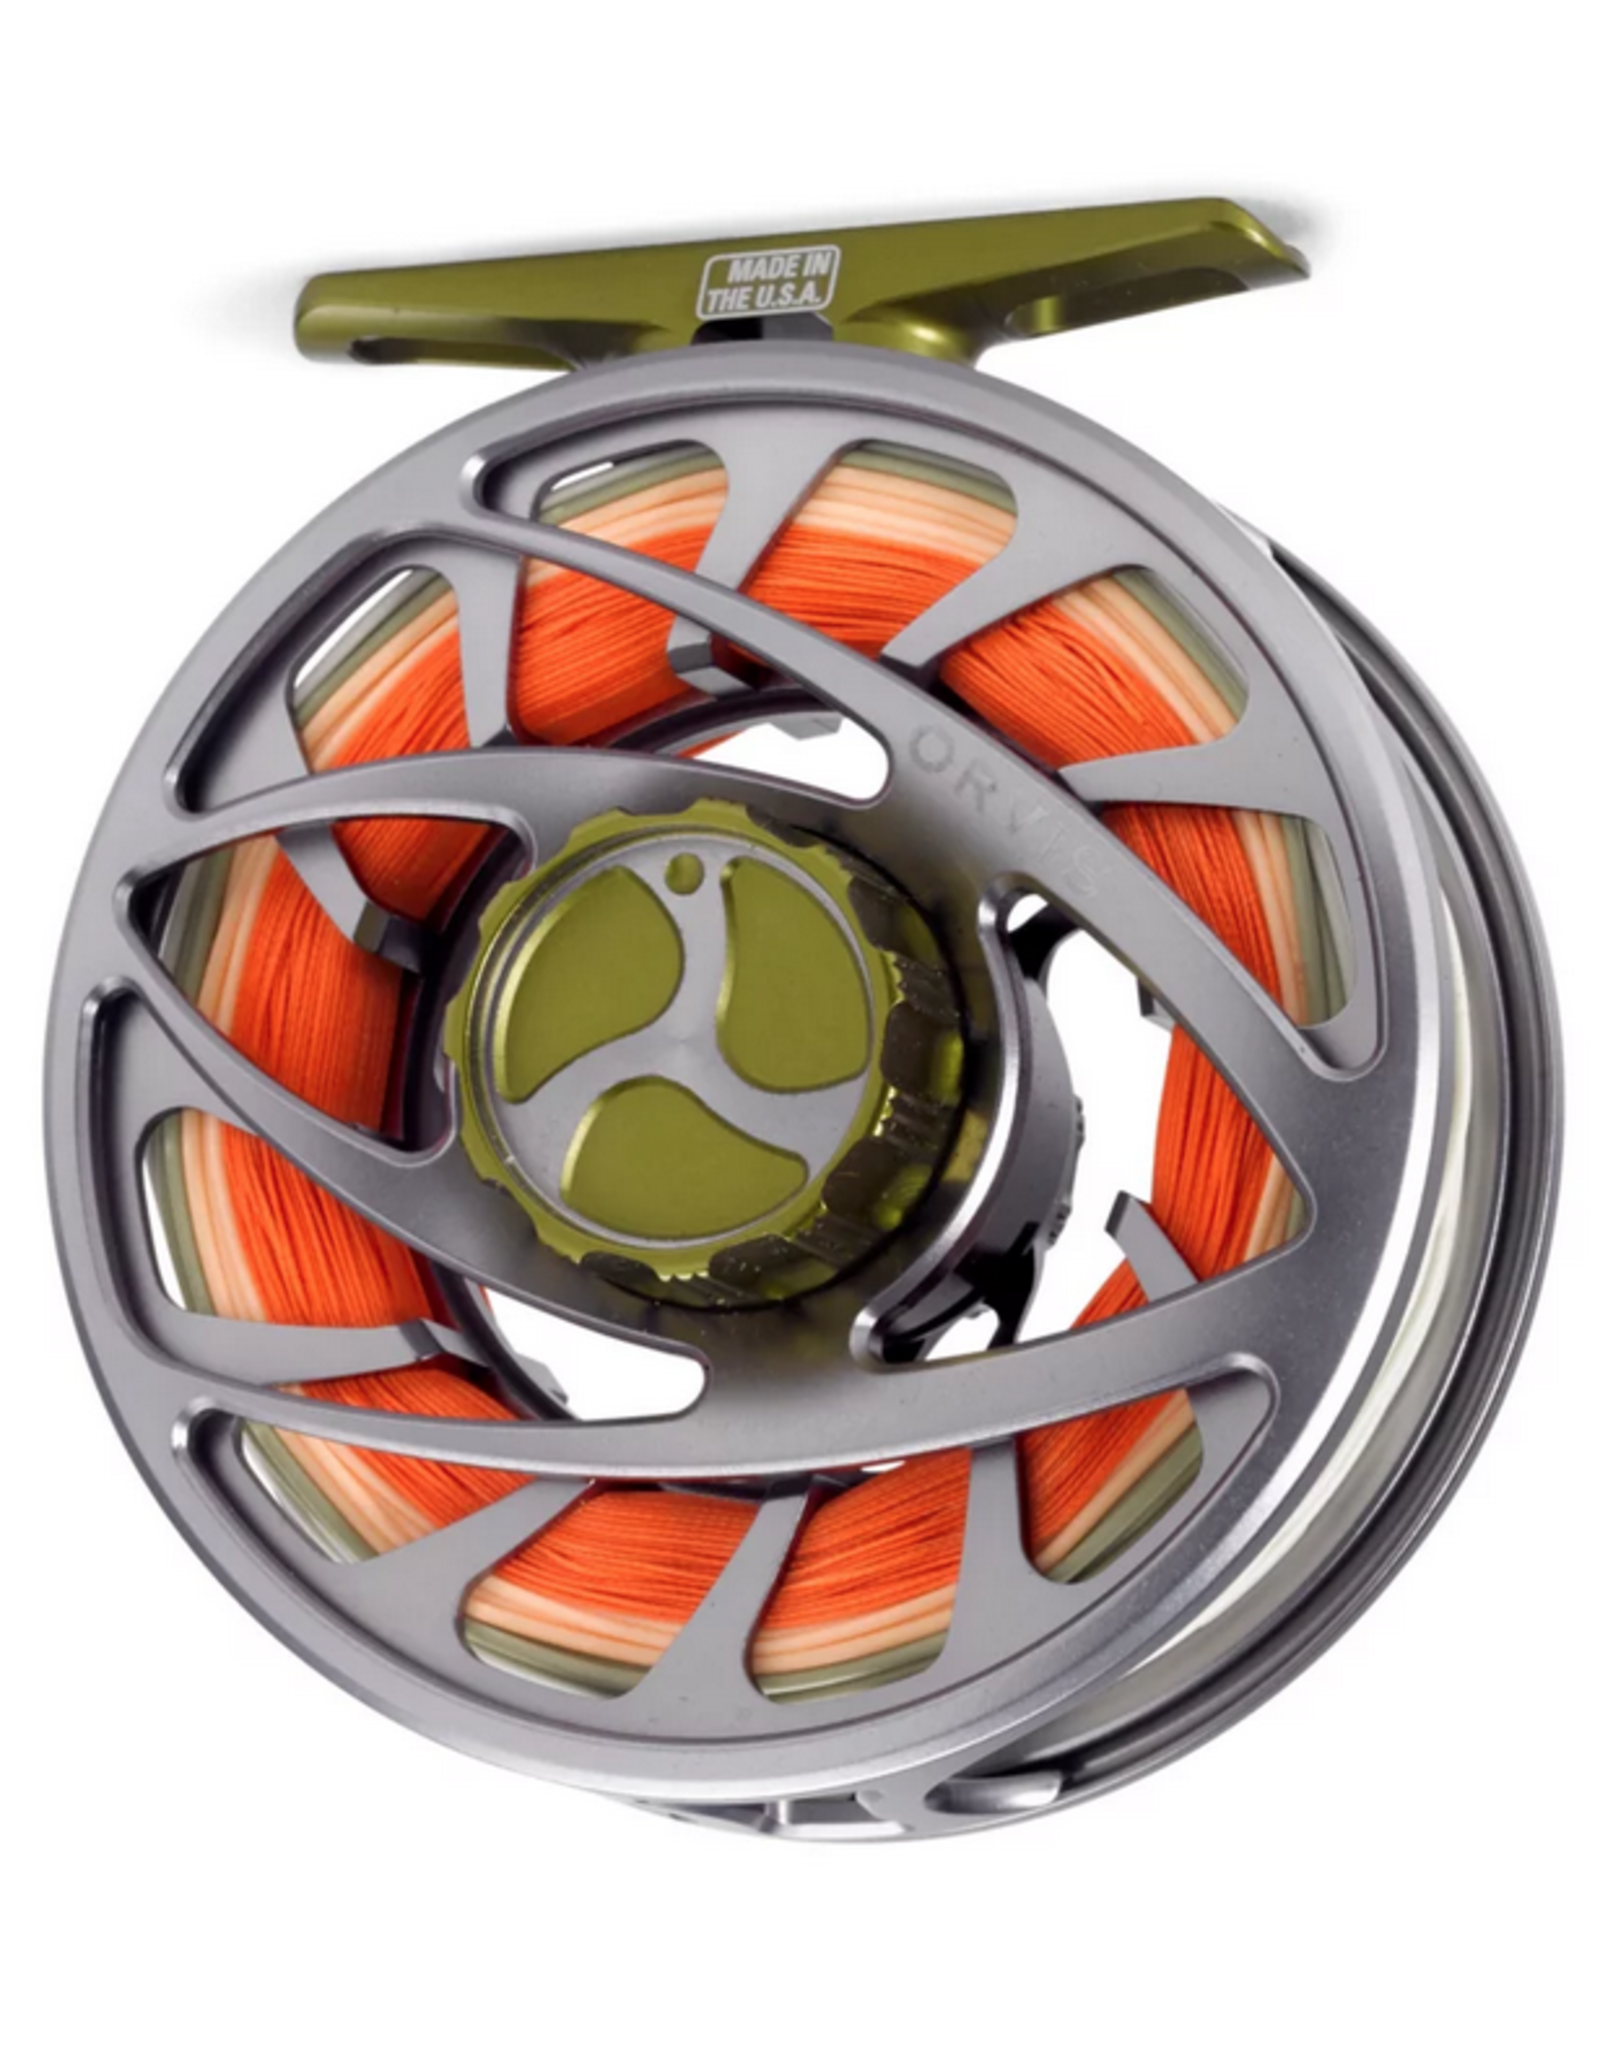 Orvis Mirage LT III (Pewter) - Royal Gorge Anglers